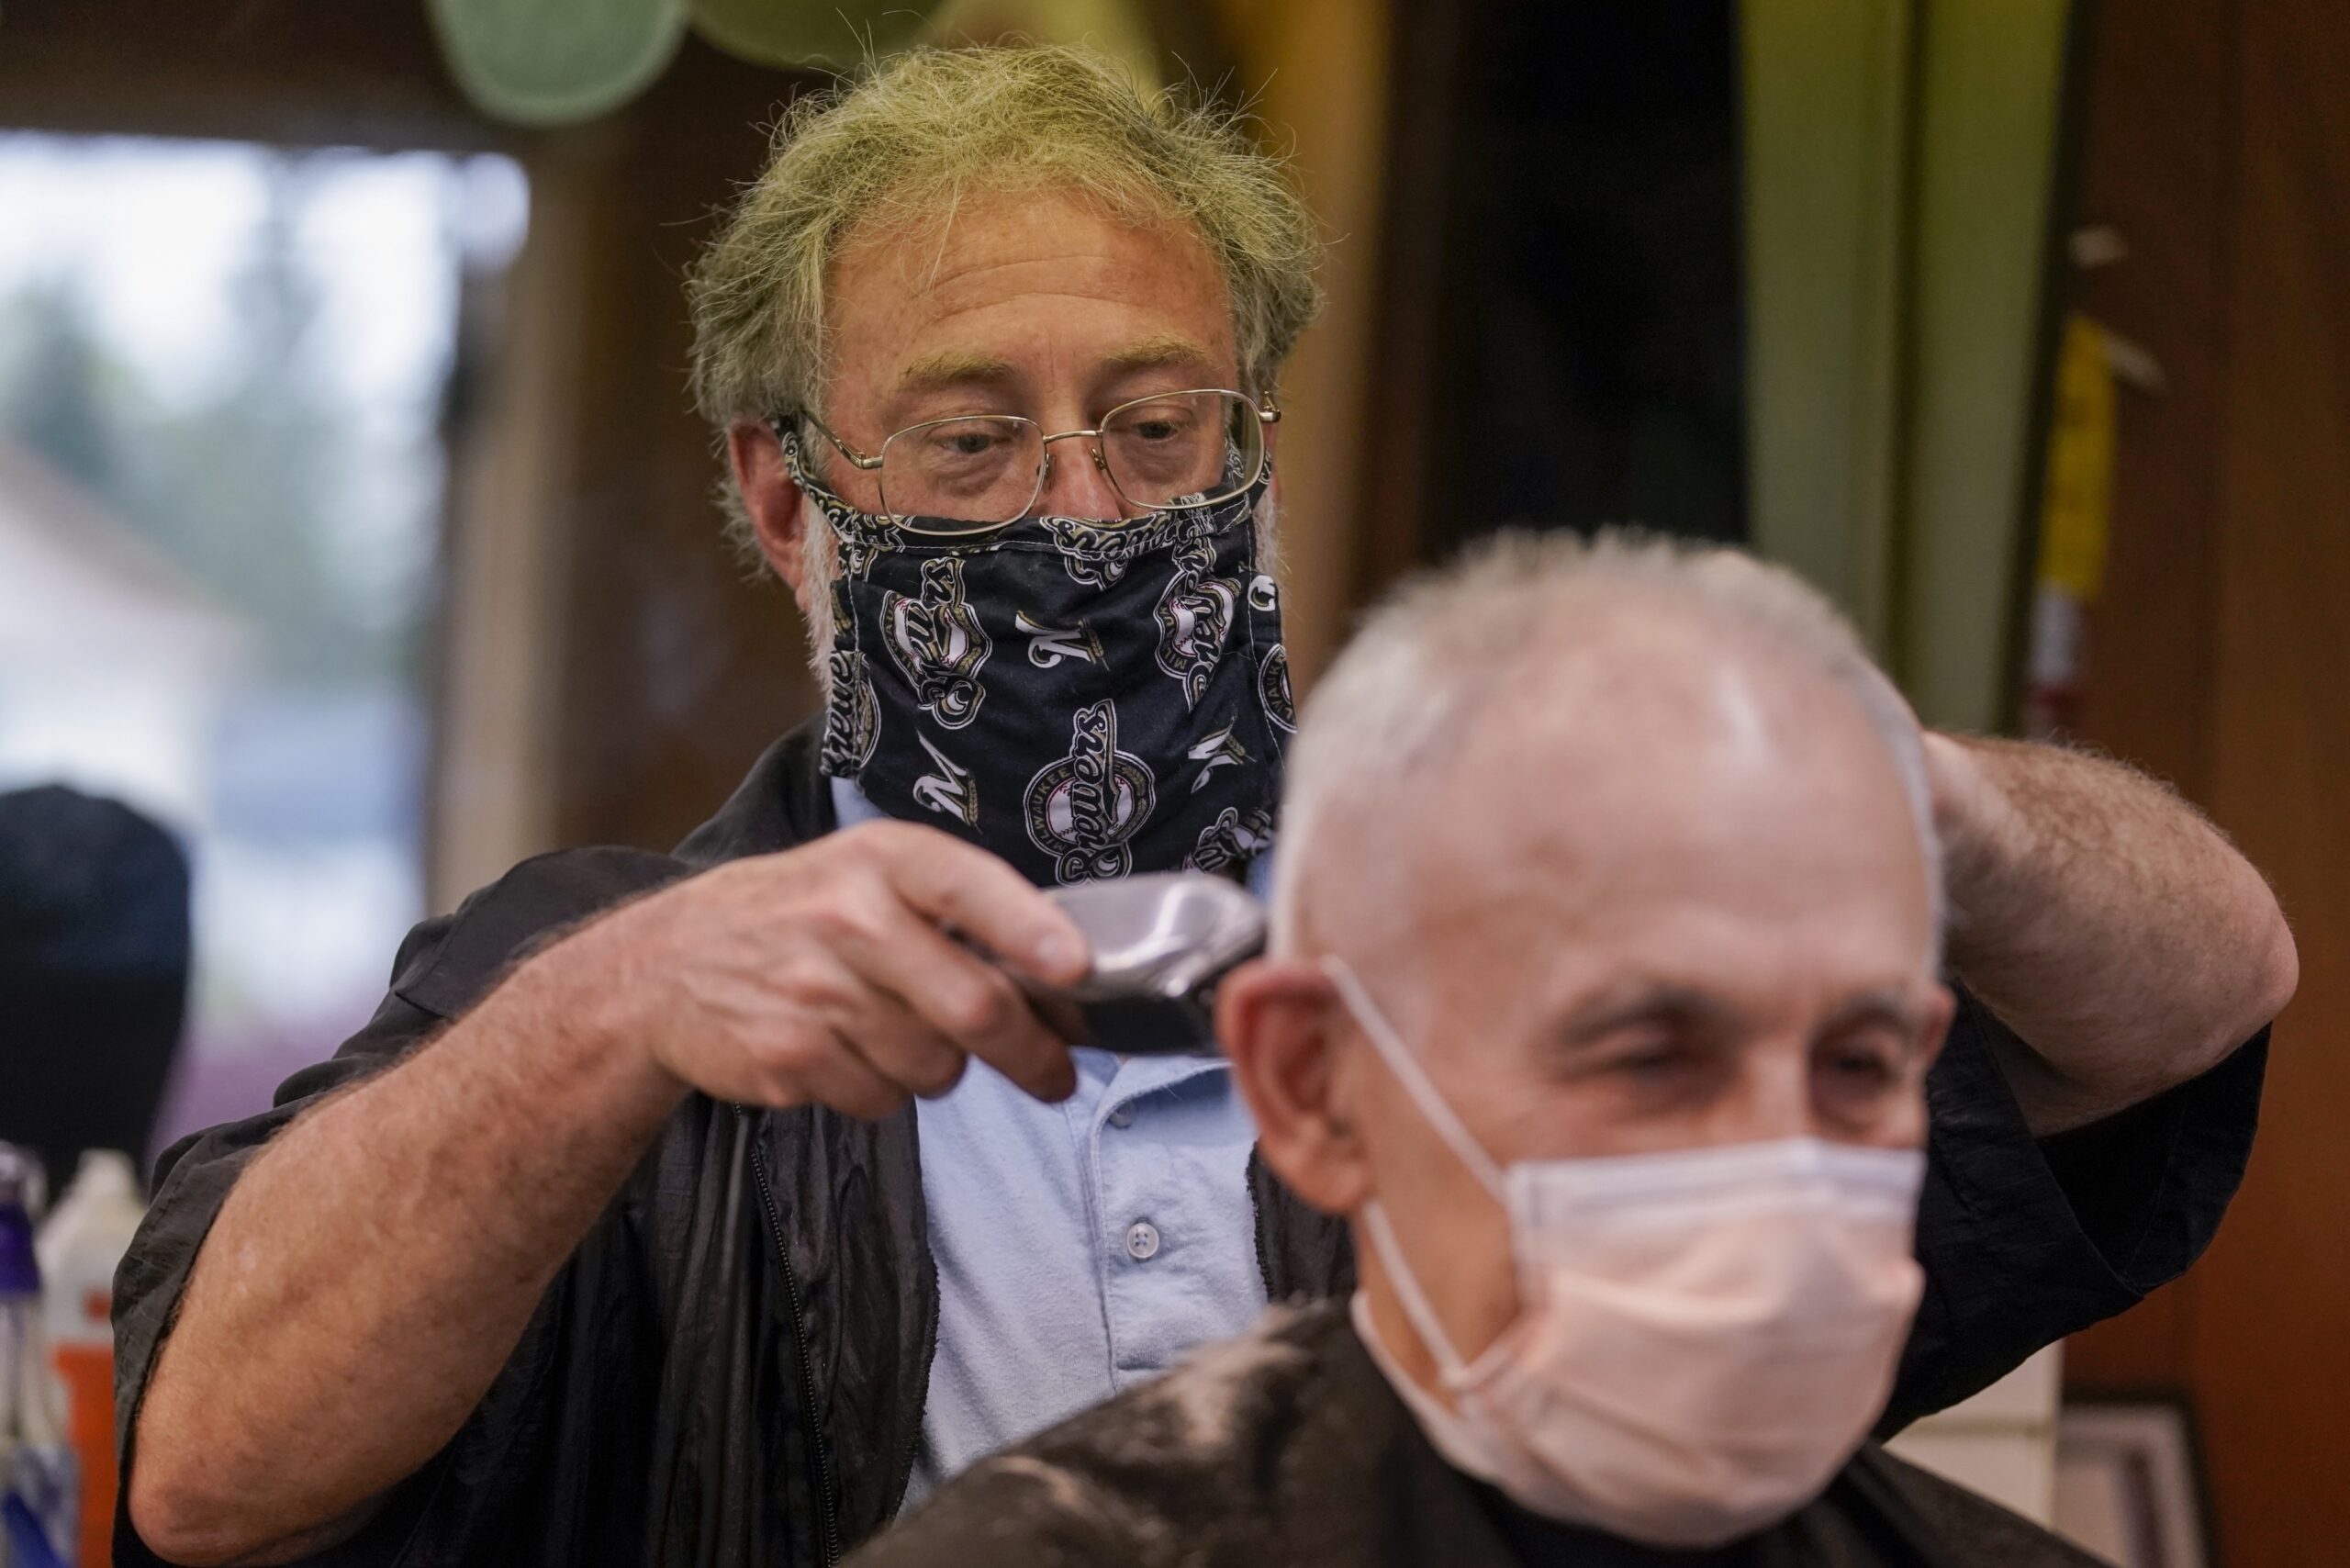 A man gets a haircut in Waukesha, Wis. on May 14, 2020.